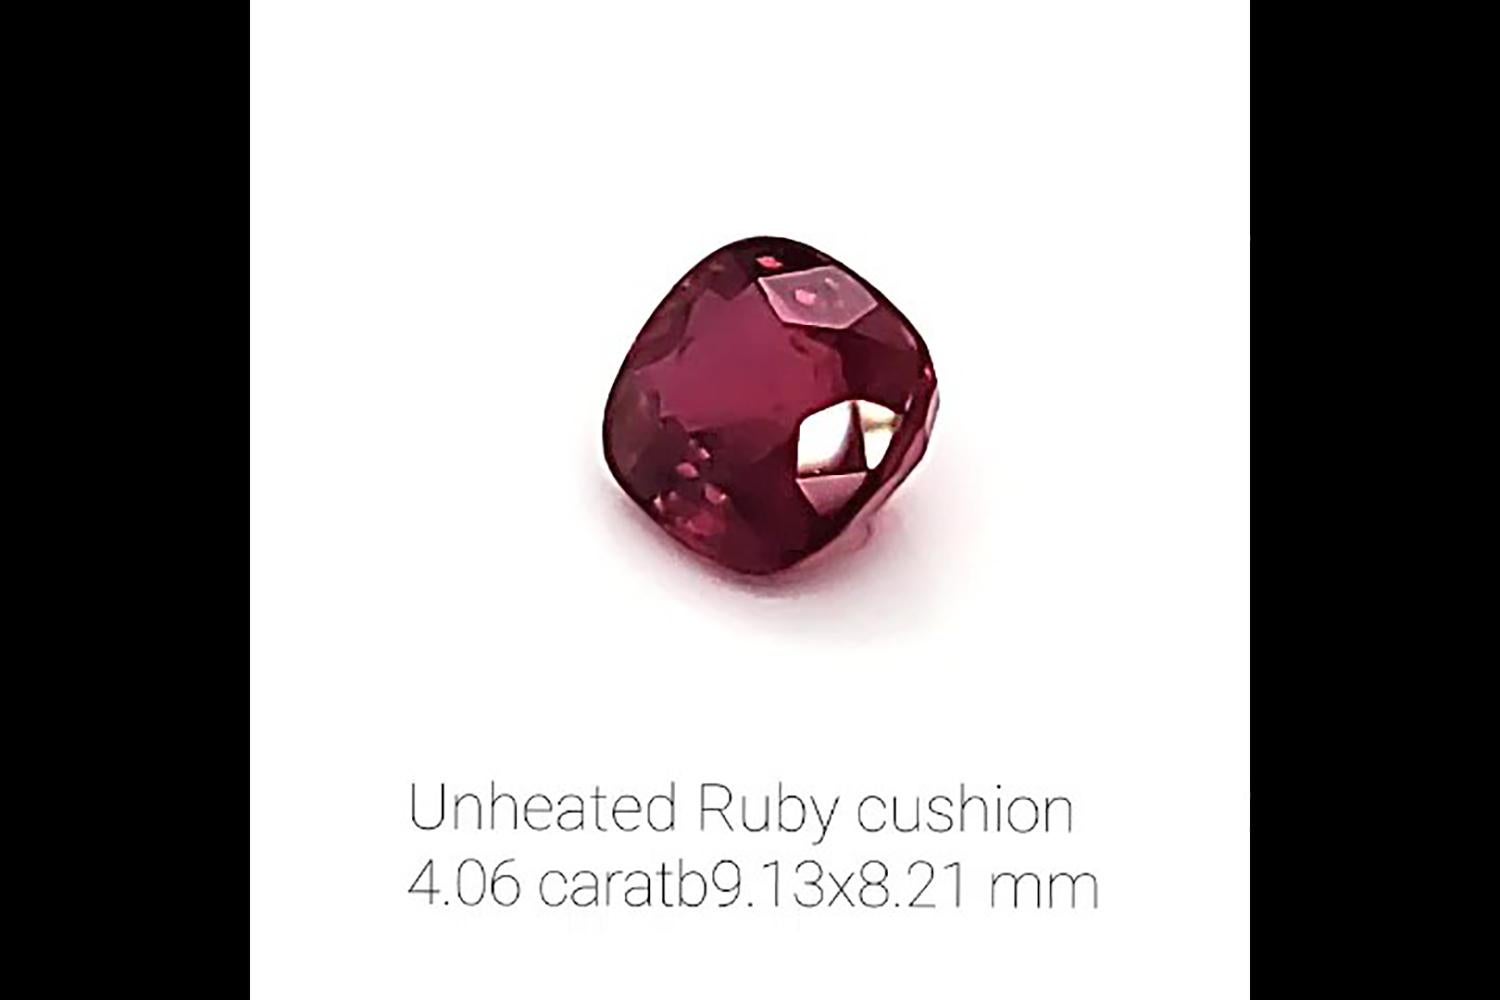 4.06 carat Natural  UnHeated Red Ruby, of a high quality intense deep red, perfect choice for collectors or to commission a custom, unique piece of jewelry with it. 

We are master jewelers with a vast experience in creating custom jewerly and we